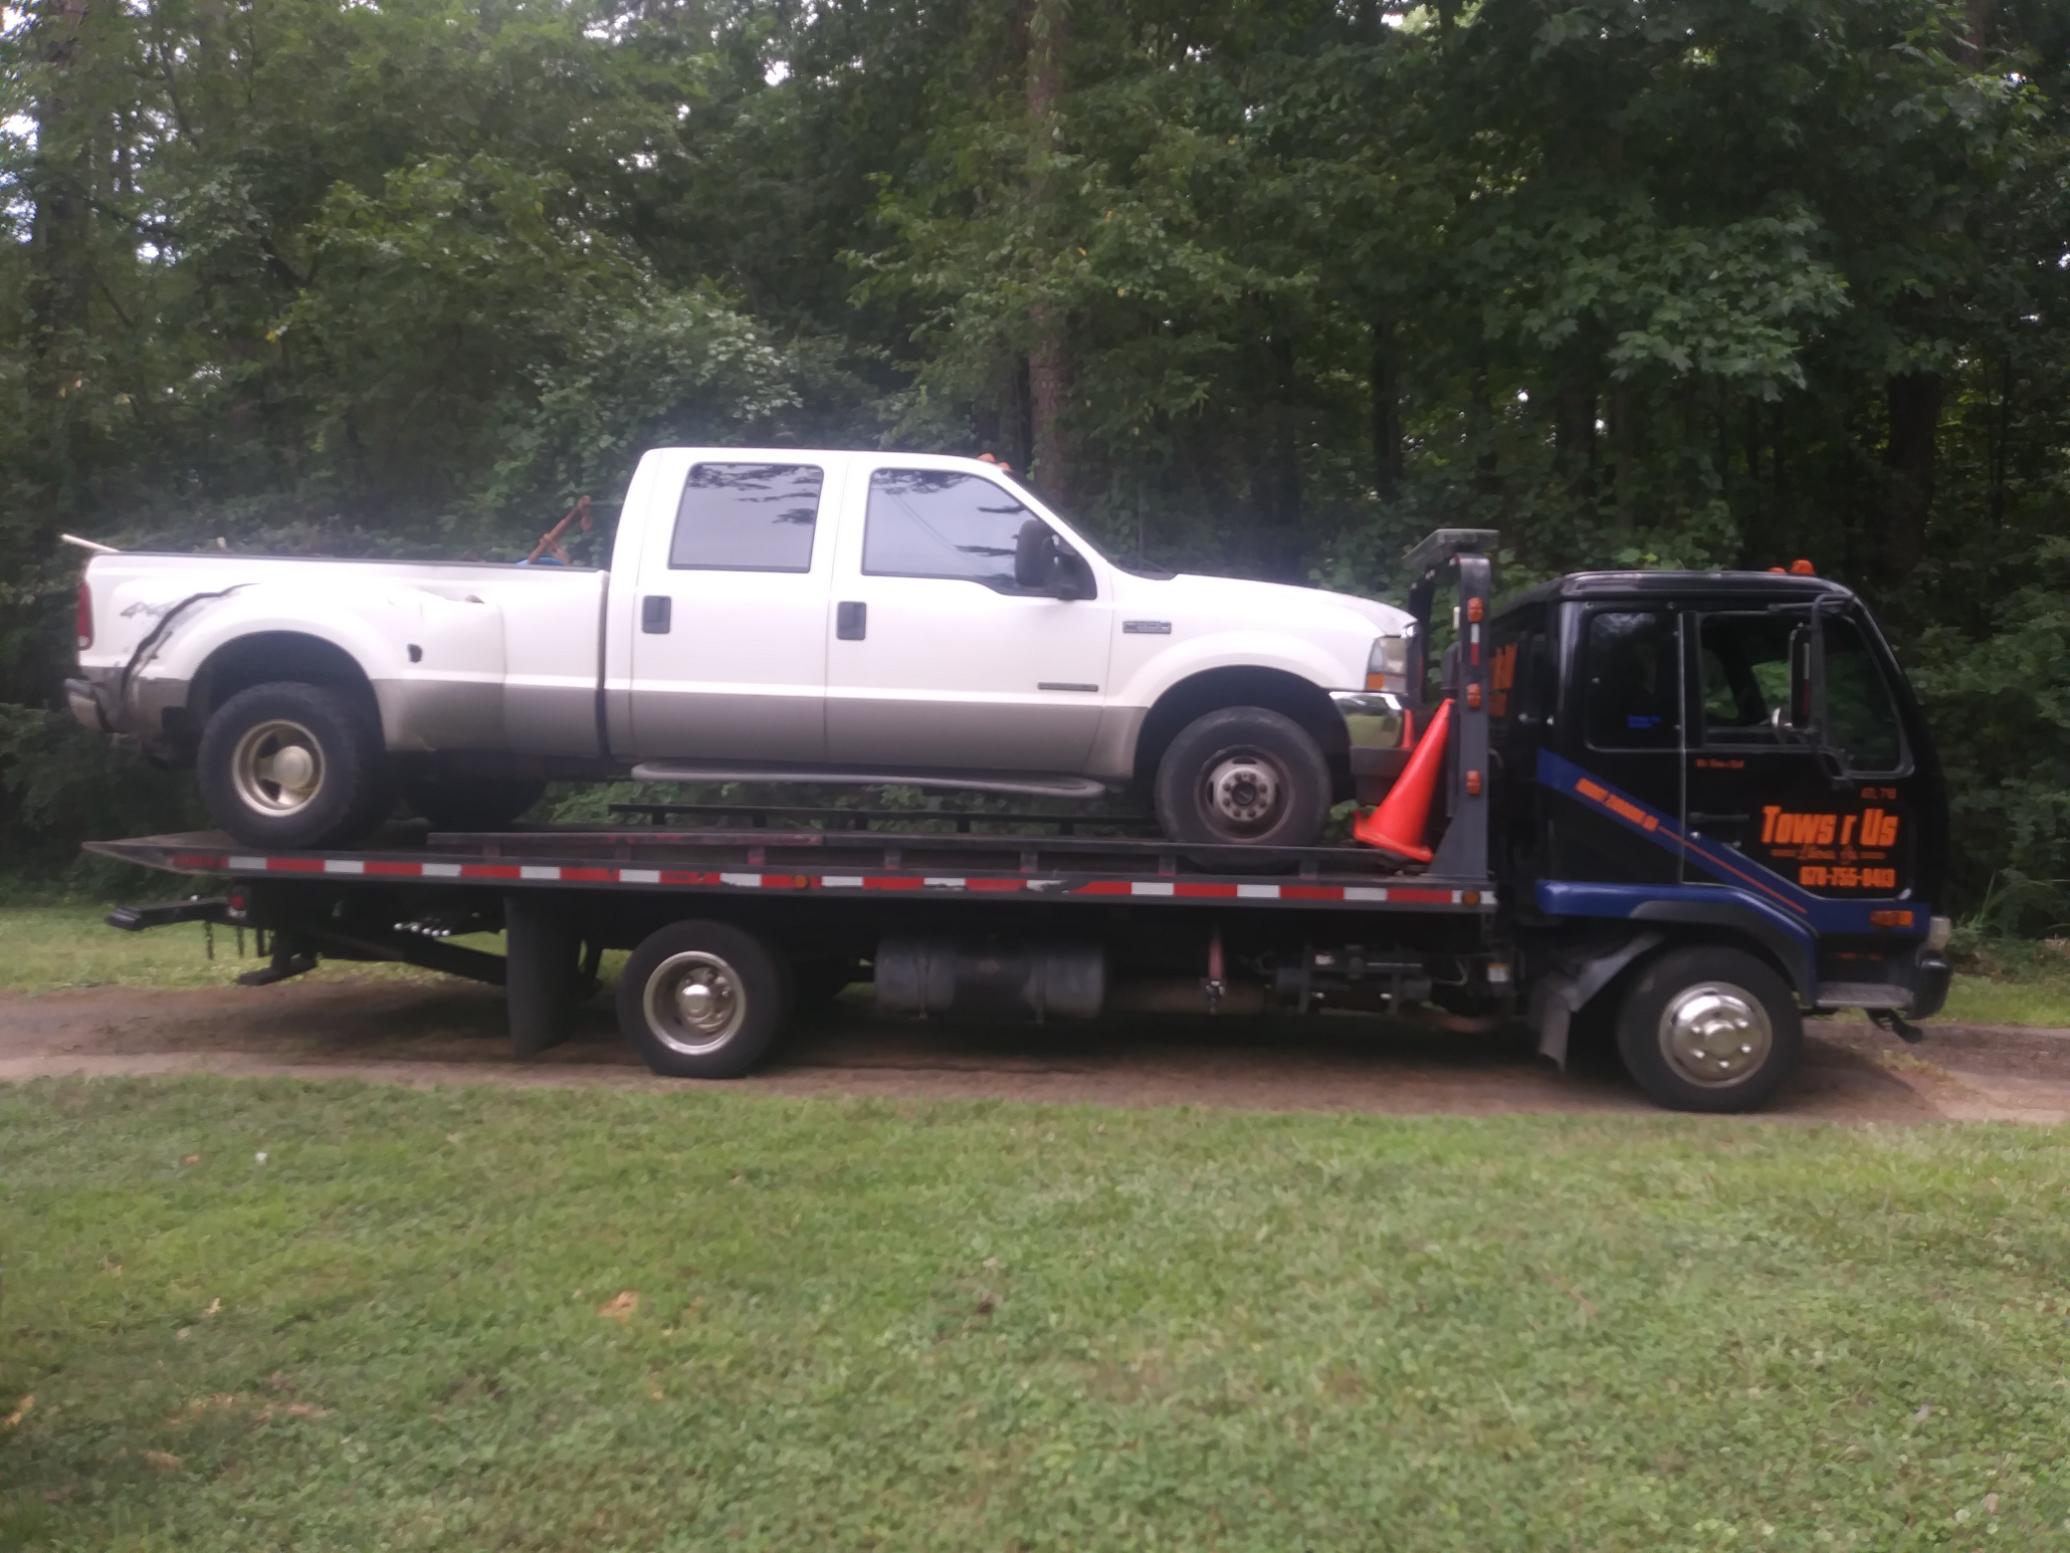 Tows-R-Us | (678) 755-8413 | Lithonia, GA | 24 Hour Towing Service | Light Duty Towing | Medium Duty Towing | Flatbed Towing | Box Truck Towing | School Bus Towing | Classic Car Towing | Dually Towing | Exotic Towing | Junk Car Removal | Limousine Towing | Winching & Extraction | Wrecker Towing | Luxury Car Towing | Accident Recovery | Equipment Transportation | Moving Forklifts | Scissor Lifts Movers | Boom Lifts Movers | Bull Dozers Movers | Excavators Movers | Compressors Movers | Wide Loads Transportation | Exotic Car & Sport Car Towing | Long Distance Towing | Auto Transport | Tipsy Towing | Lockouts | Fuel Delivery | Jump Starts | Roadside Assistance | Motorcycle Towing | Tire Service | Private Property Impound (Non-Consensual Towing)